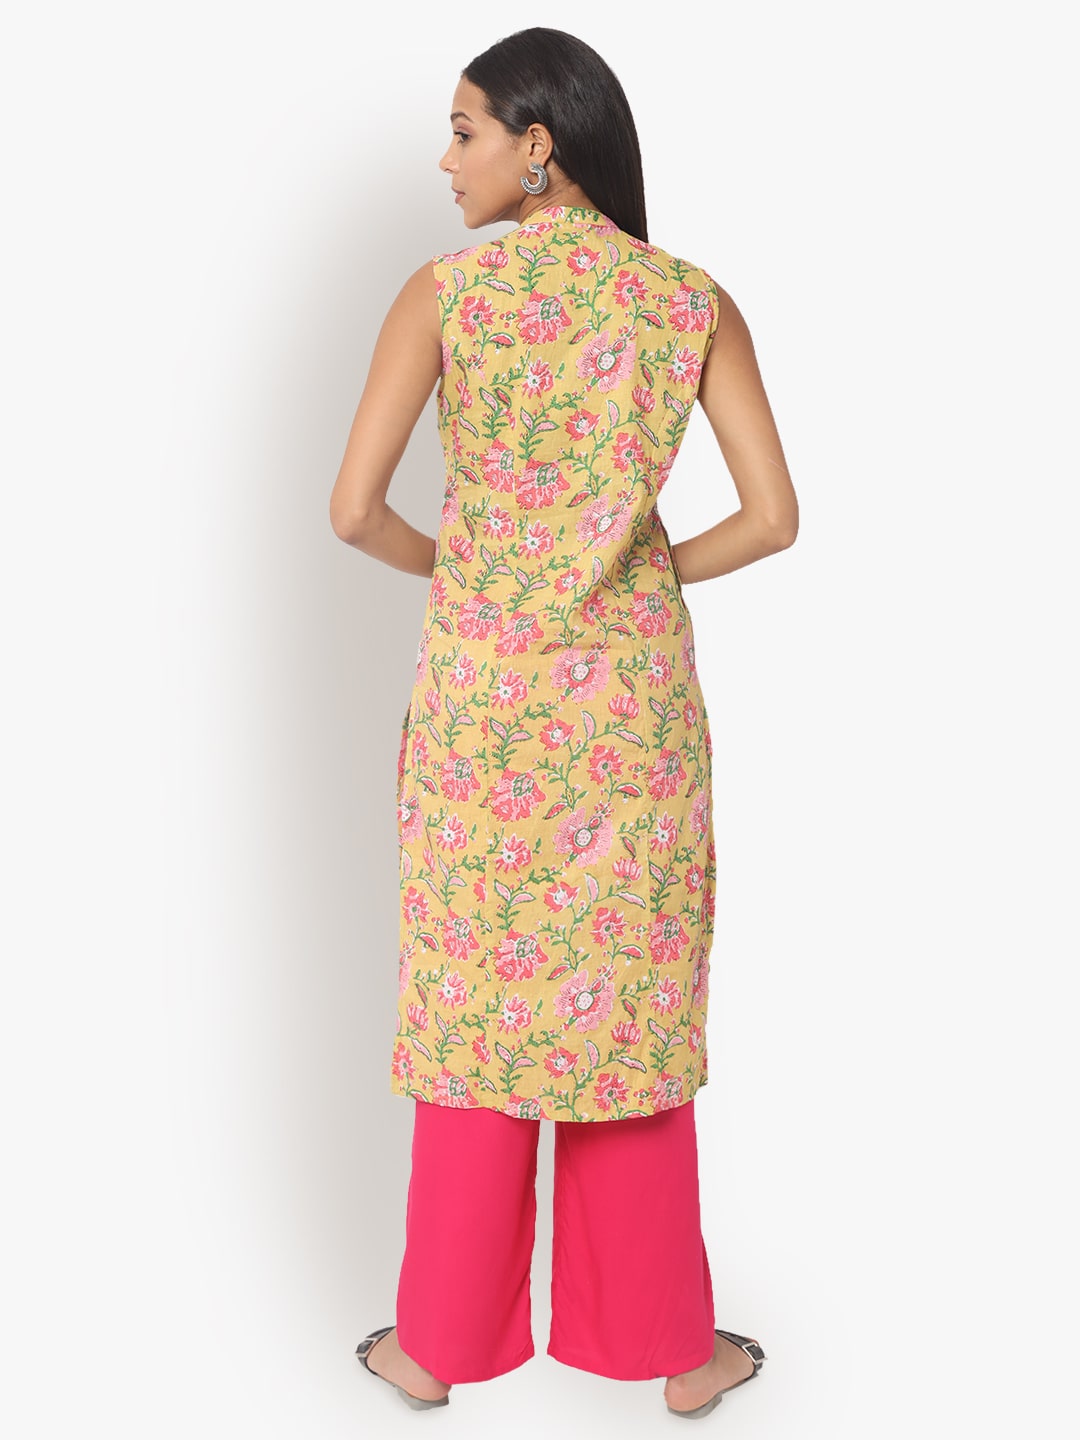 Buy Anwija Combo of Womens Stylish and Fancy Solid Plain Rayon Straight  Casual/Formal Sleeveless Office wear Kurtis and Side lace. (Medium,  Black/Mustard) at Amazon.in